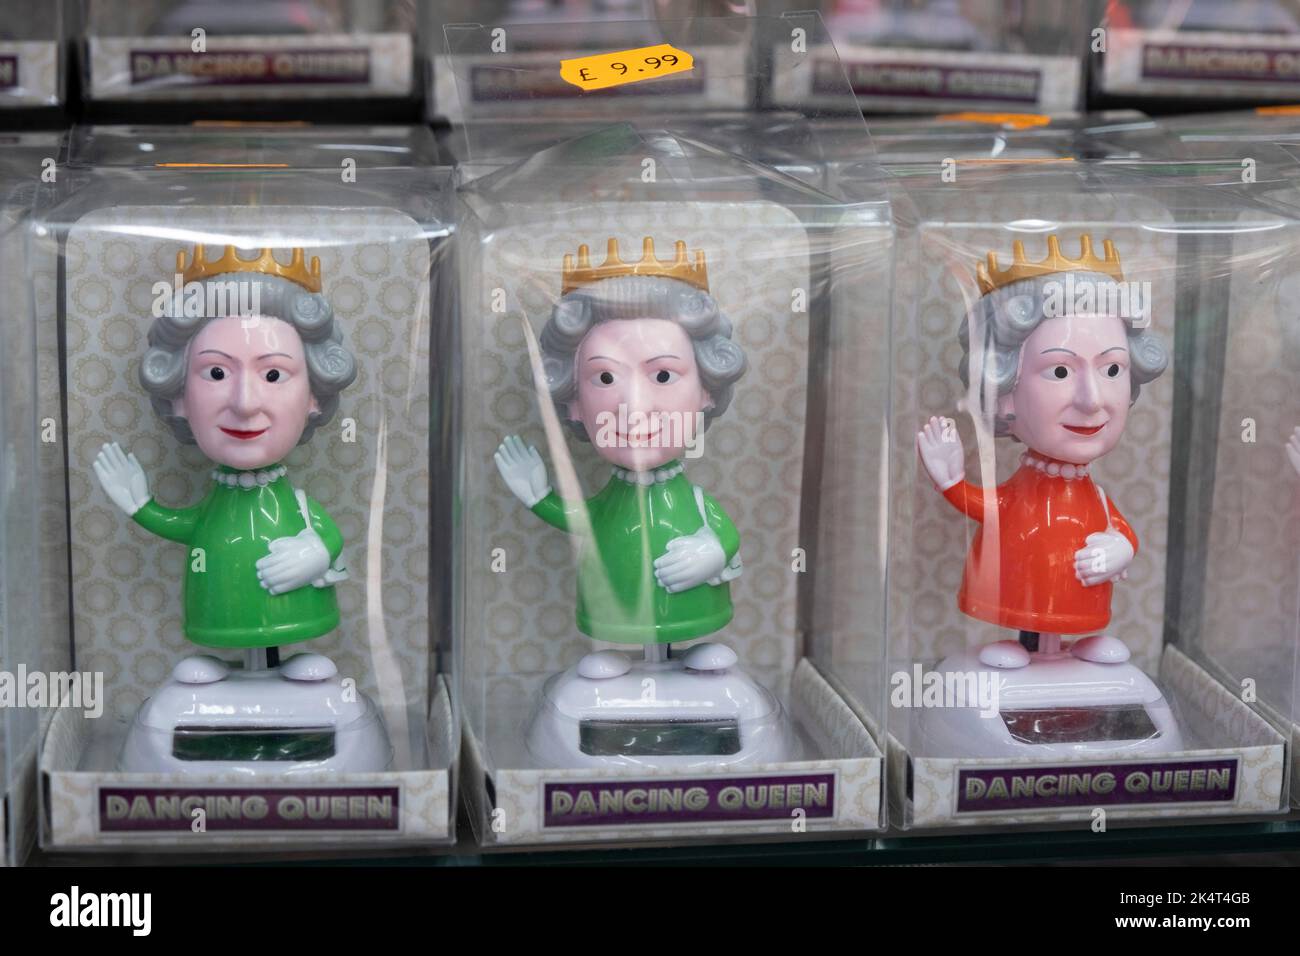 Image of the Queen used on waving bobbing head dolls called Dancing Queen in a souvenir shop following the death of Queen Elizabeth II on 12th September 2022 in London, United Kingdom. The face of the now deceased Queen will be an abiding image for centuries to come, and no doubt will remain sellable on such items. Stock Photo